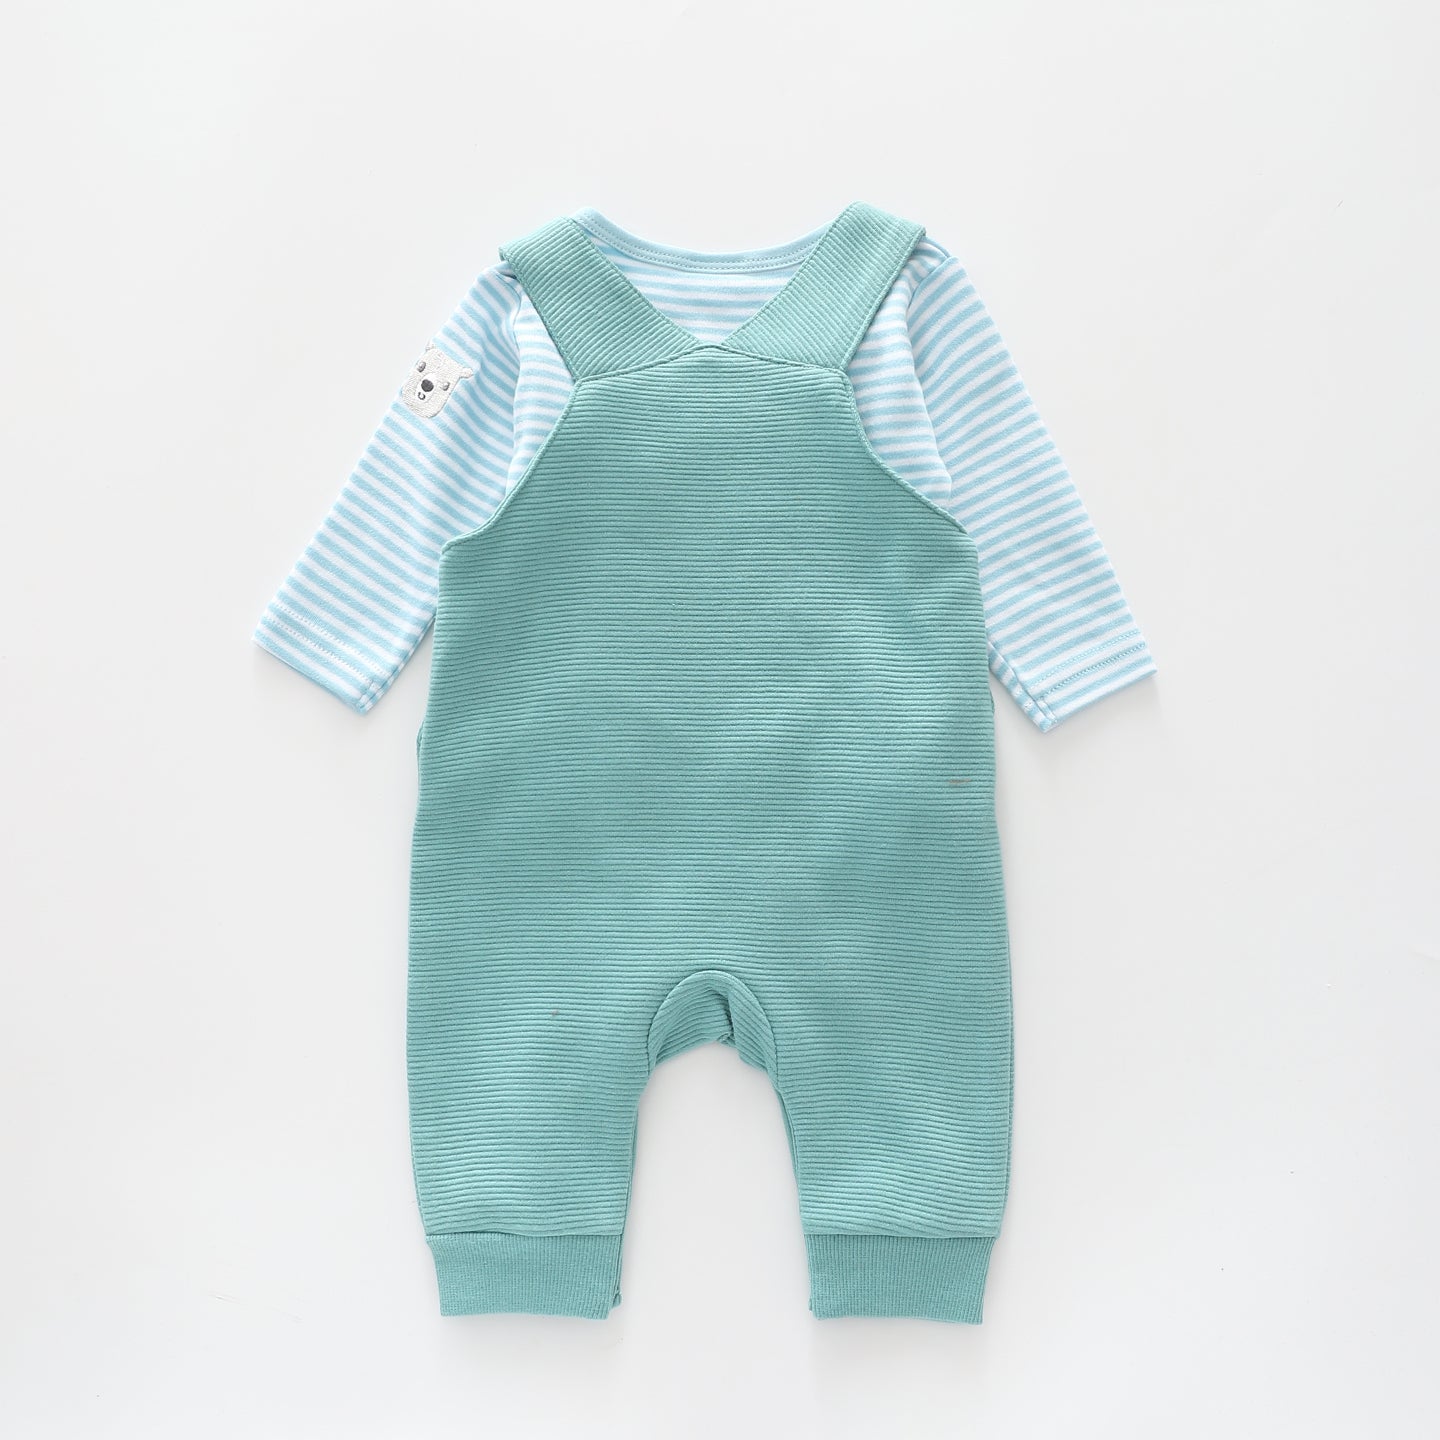 Fox and Friends, Baby Boys Overalls Set